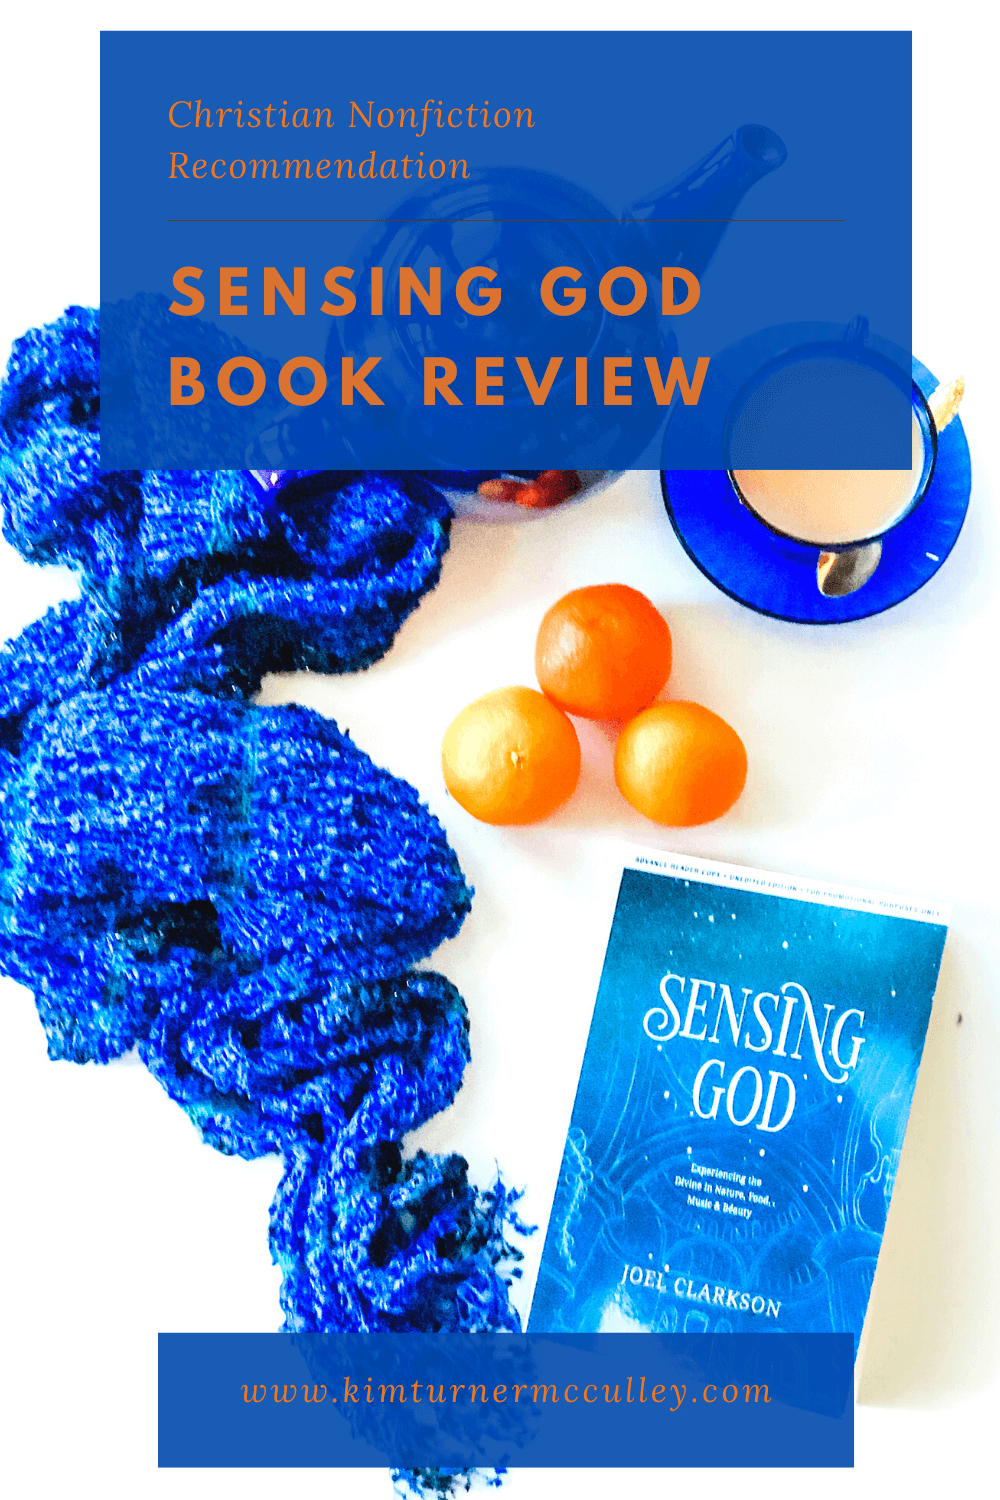 Sensing God Book Review | Christian Nonfiction Recommendation Book will draw you into a life of everyday worship. #sensinggodbook #christiannonfiction #christianbookrecommendation